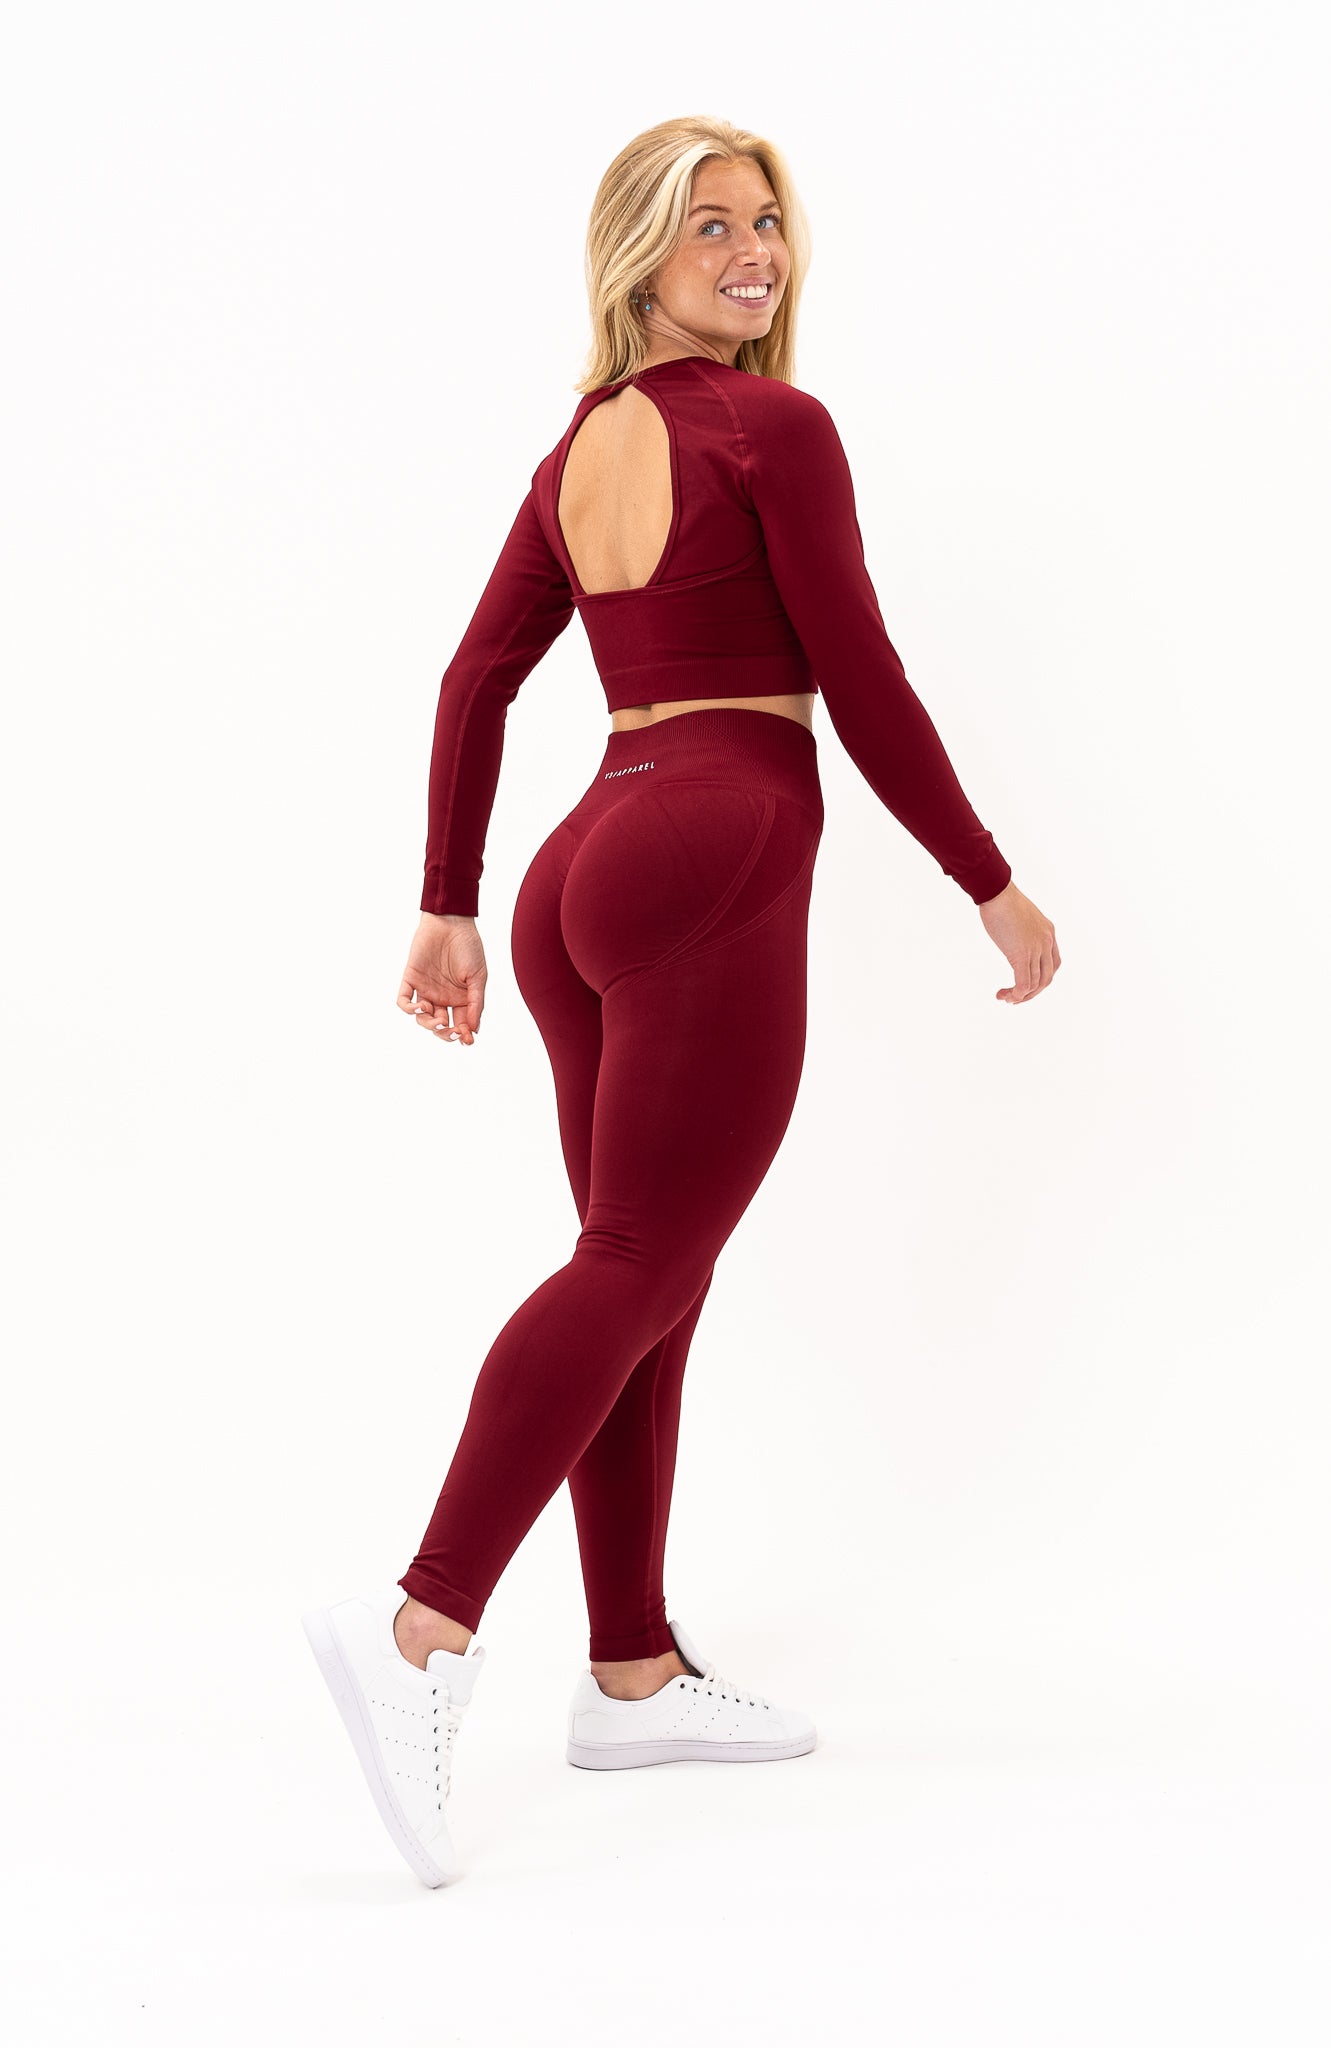 V3 Apparel Womens 2-Piece Tempo Seamless Scrunch Workout Outfit